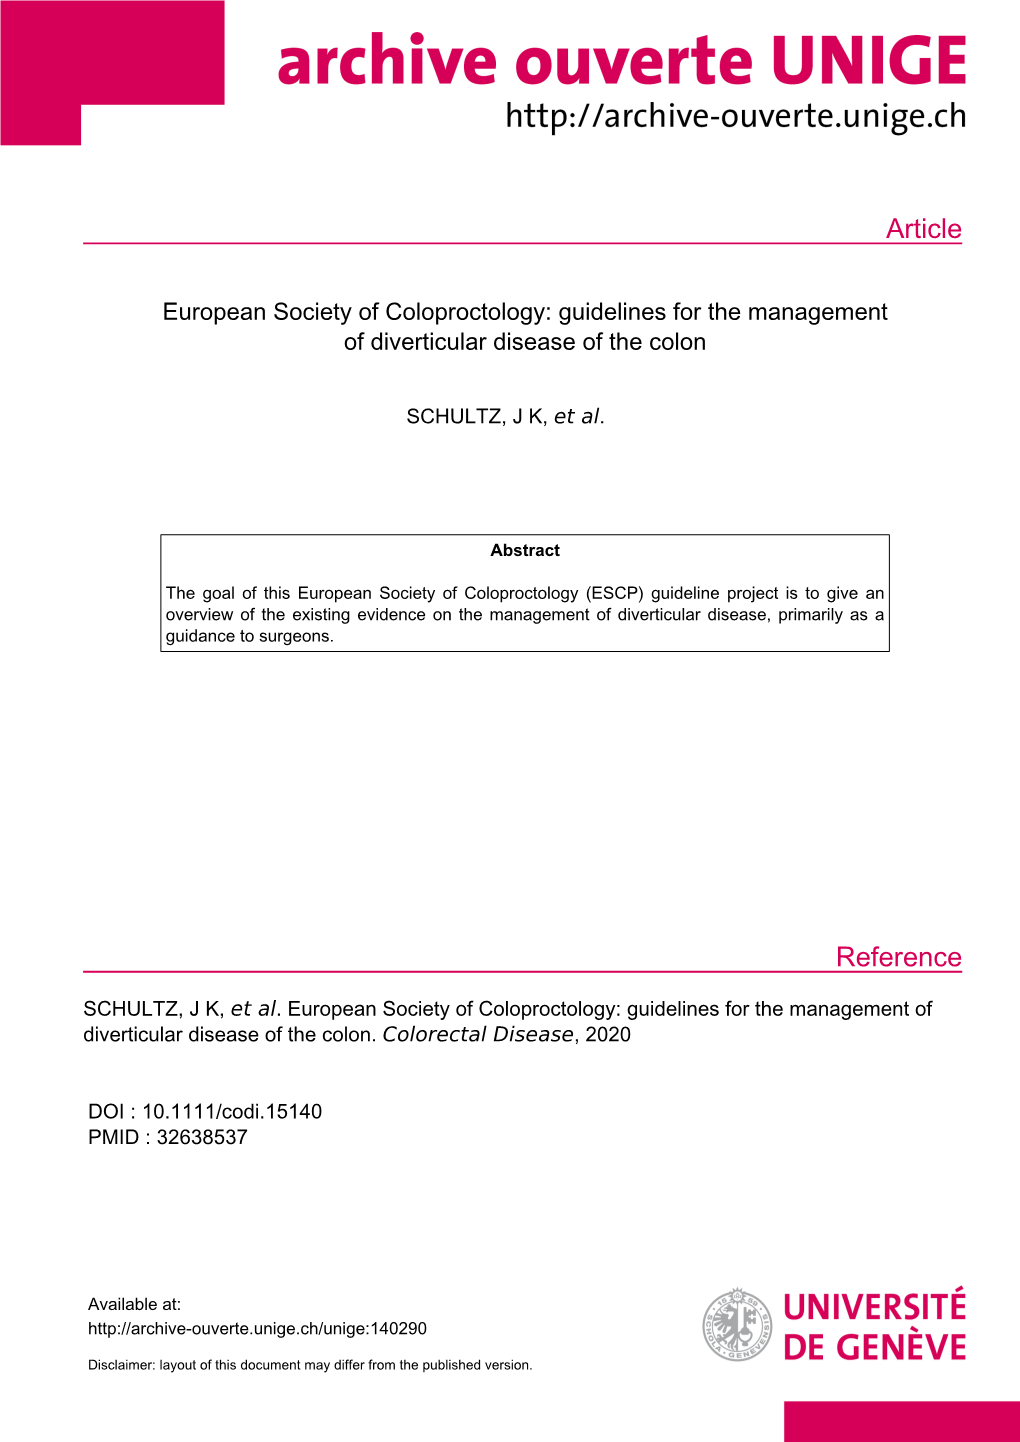 European Society of Coloproctology: Guidelines for the Management of Diverticular Disease of the Colon